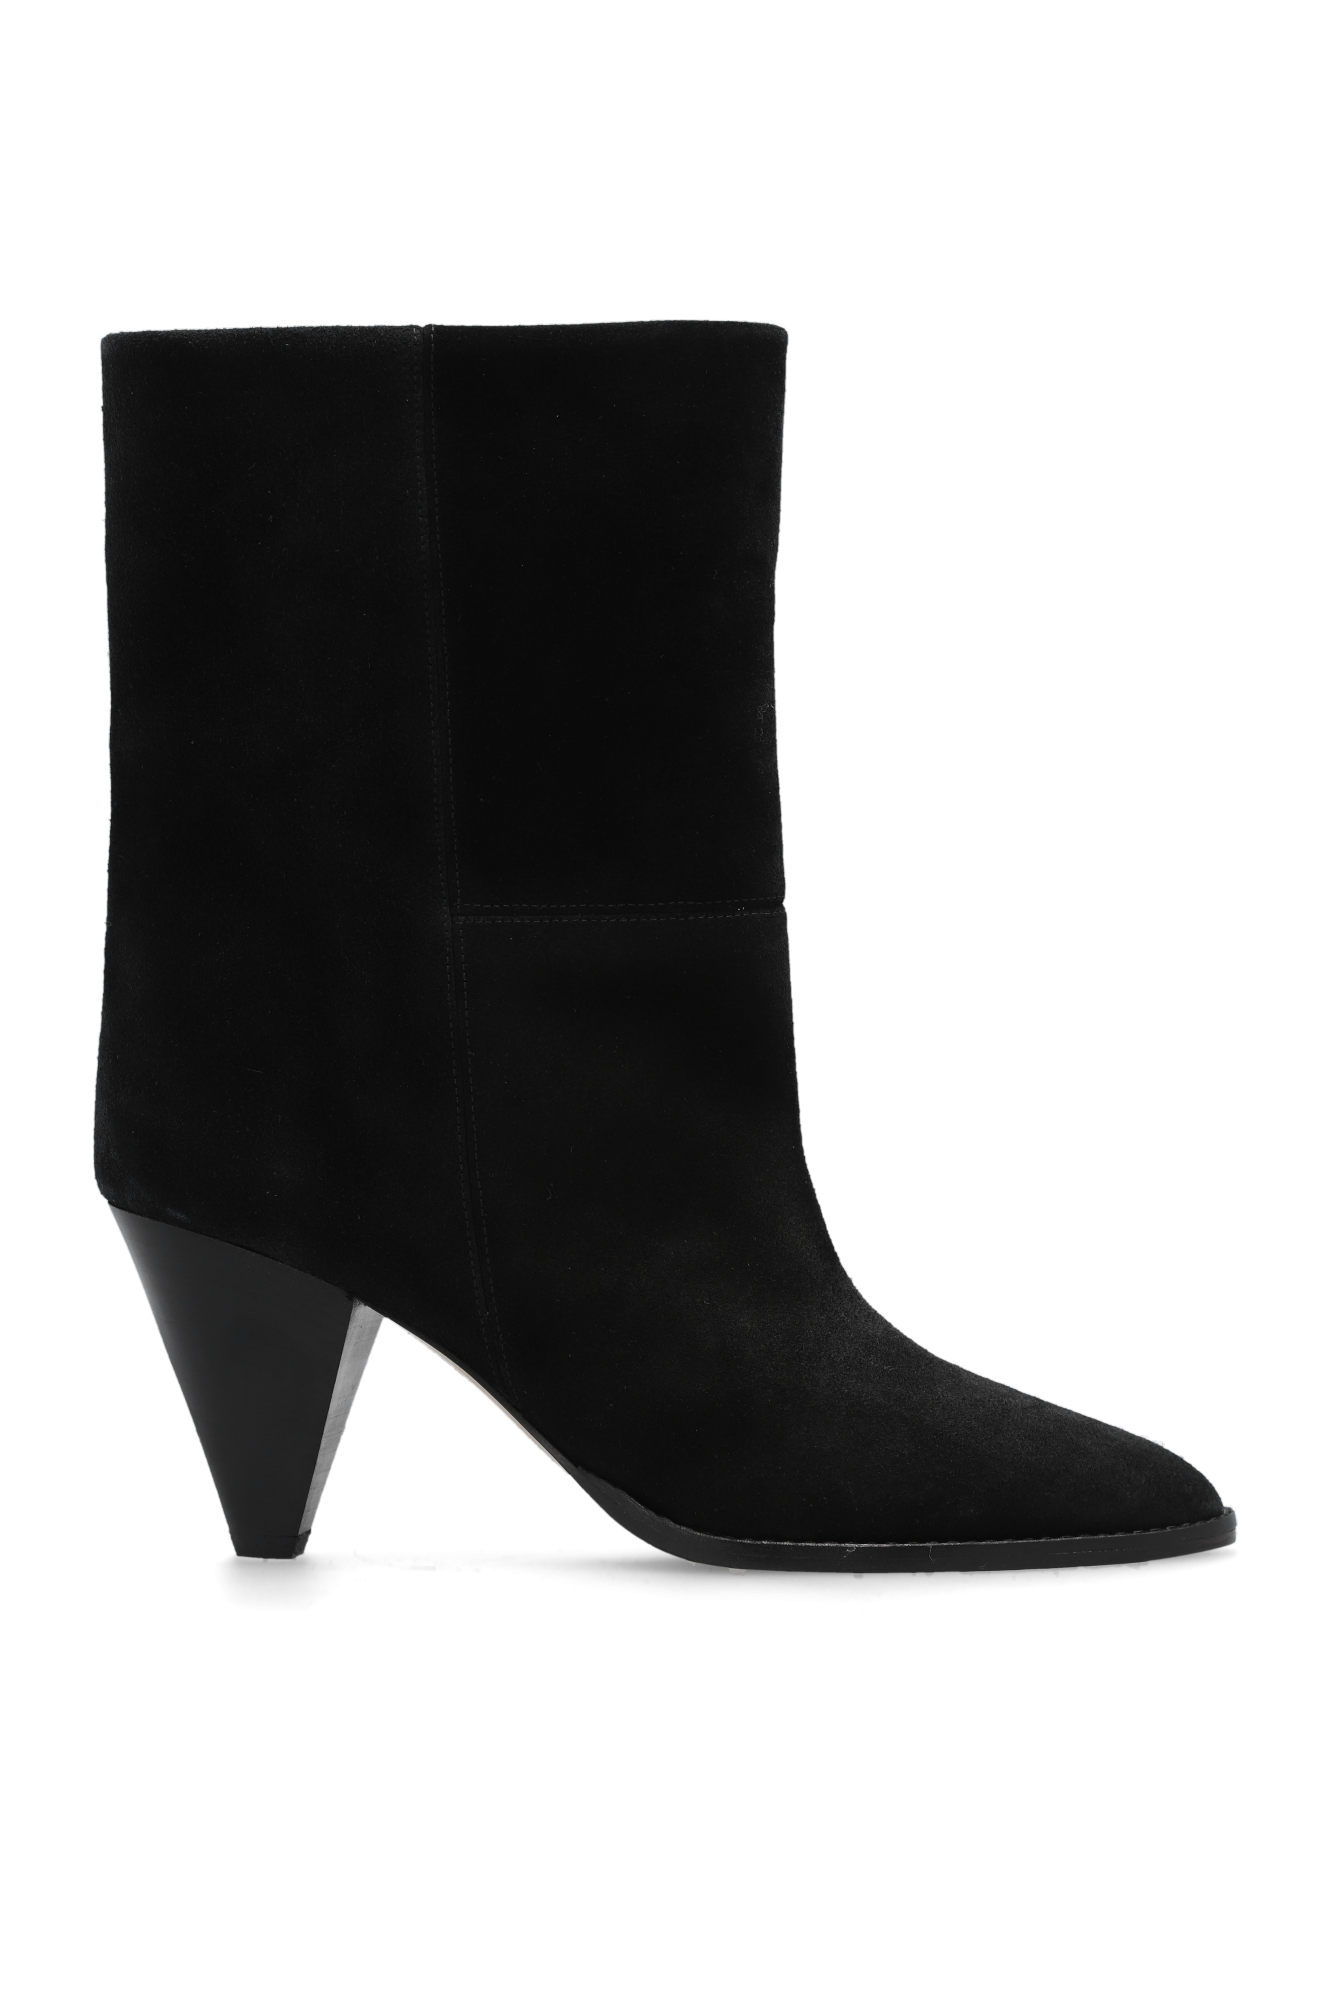 Isabel Marant ‘Rouxa’ suede heeled ankle boots